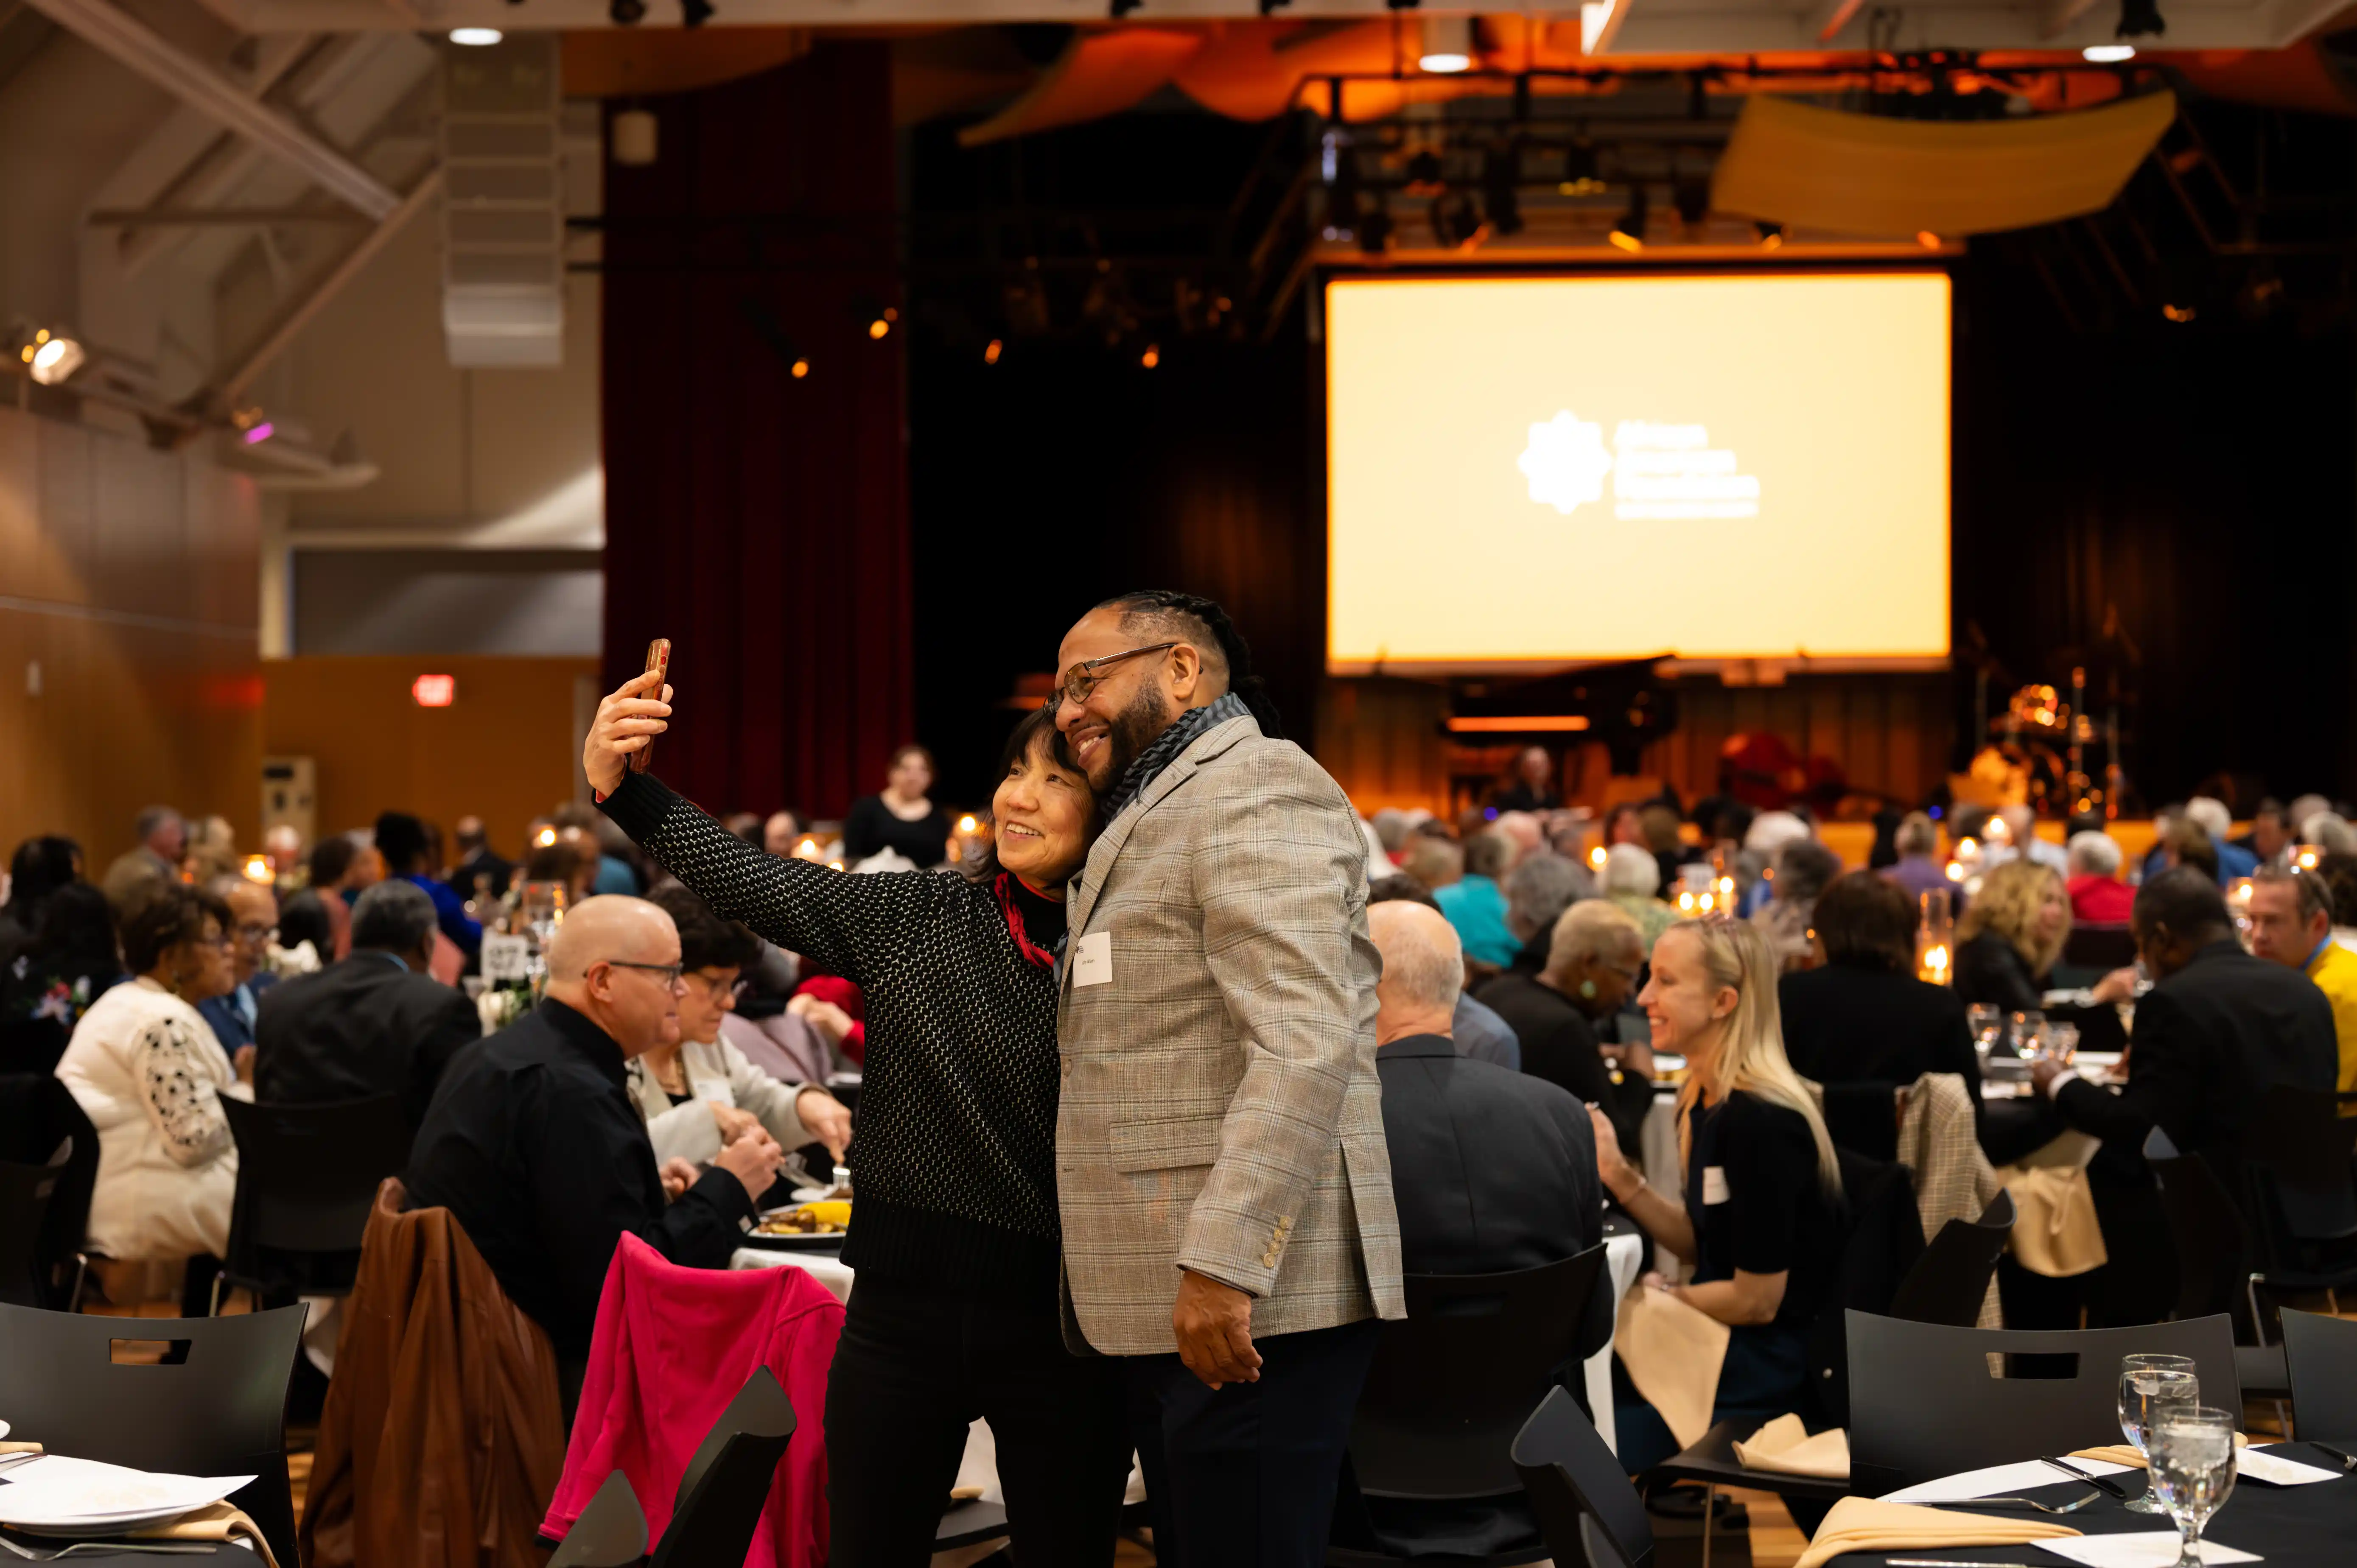 Two people taking a selfie in a bustling event hall with attendees seated at tables and a large screen in the background.